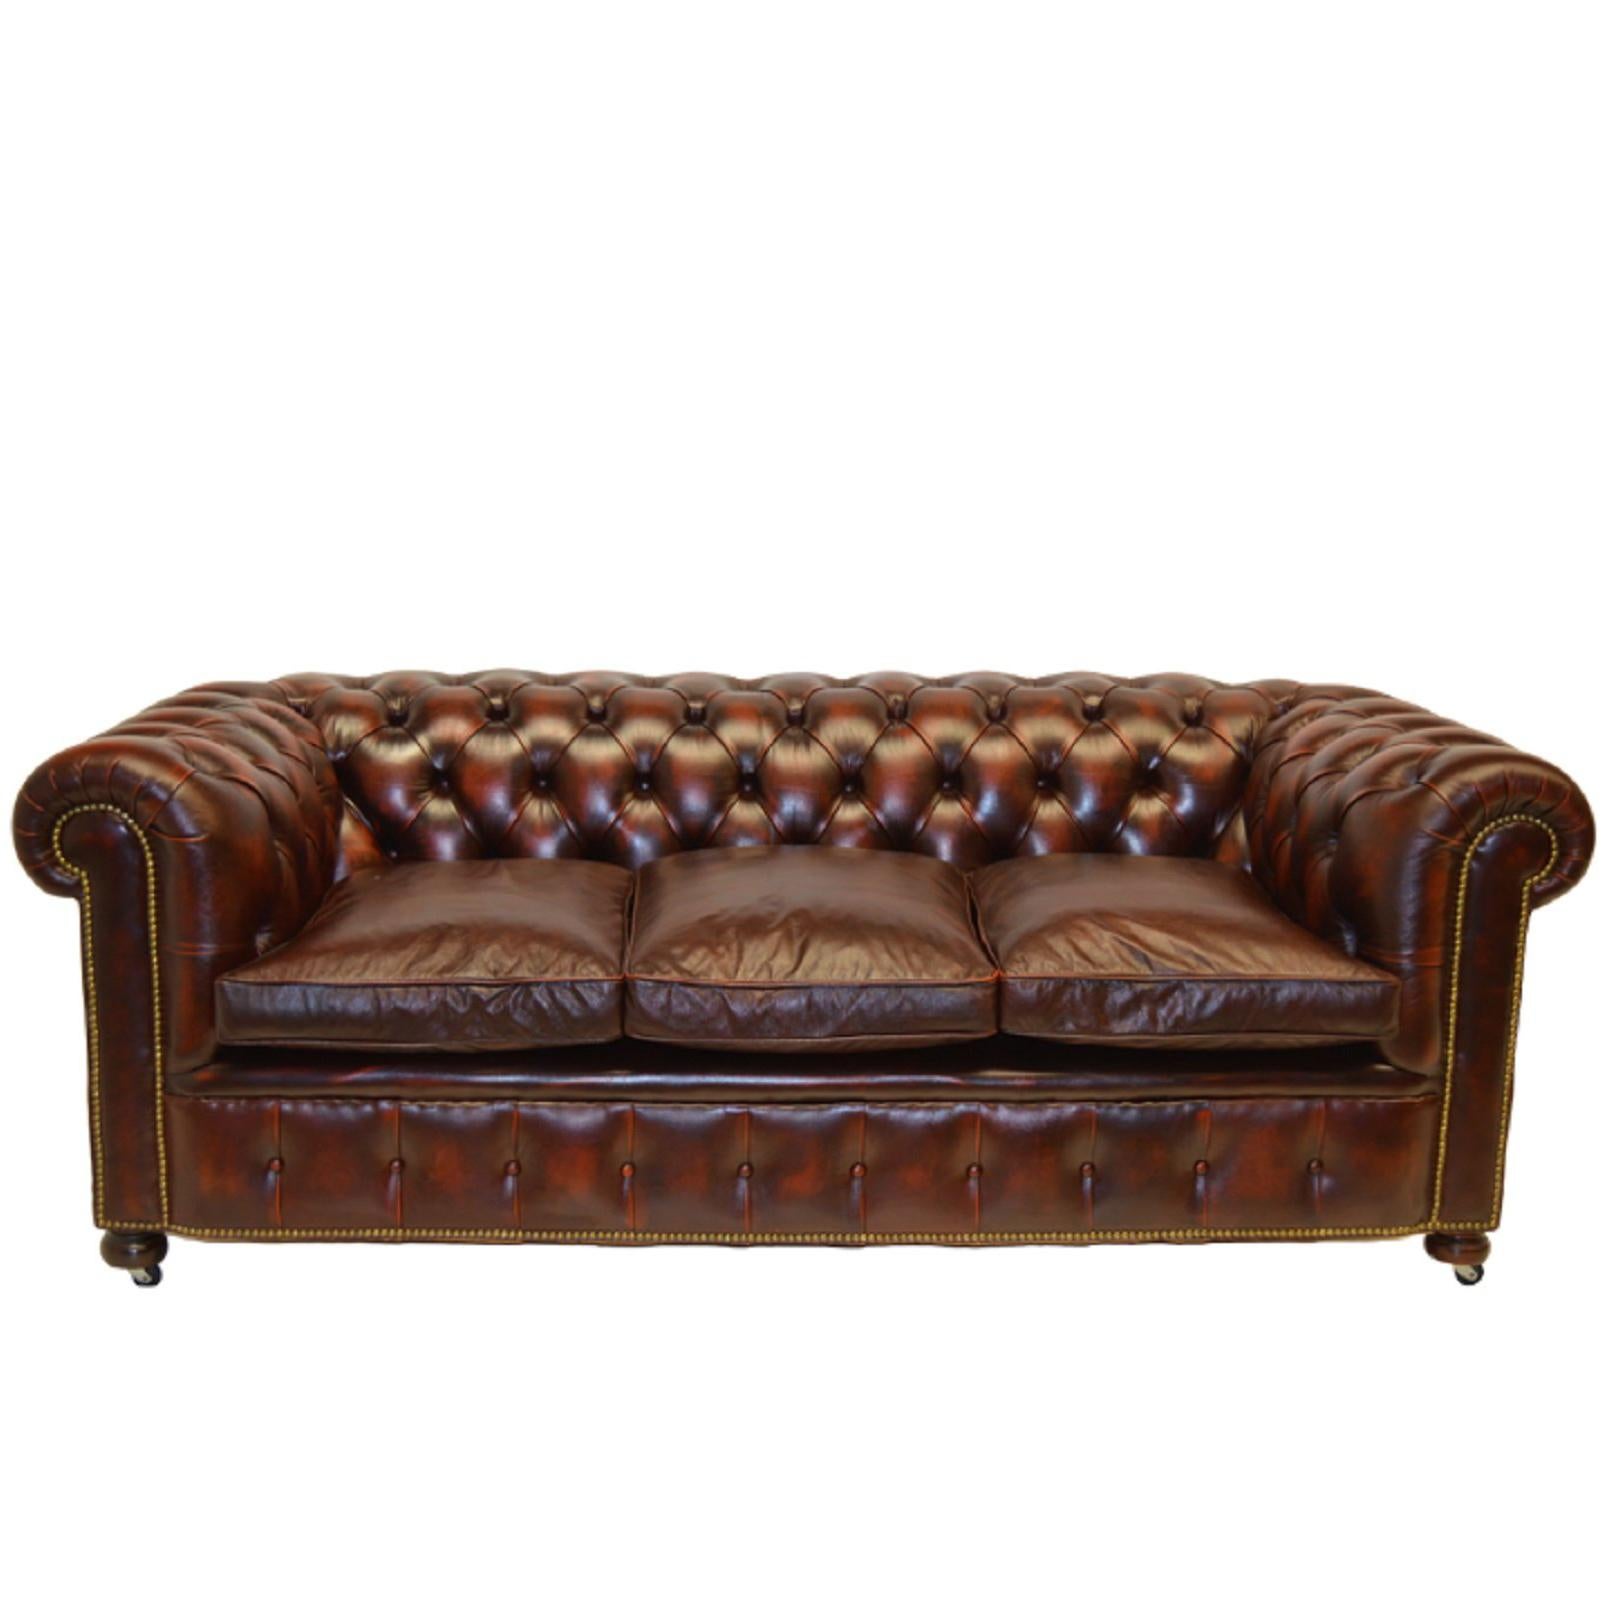 Antique Tan Chesterfield Sofa with Brass Castors / Wheels For Sale